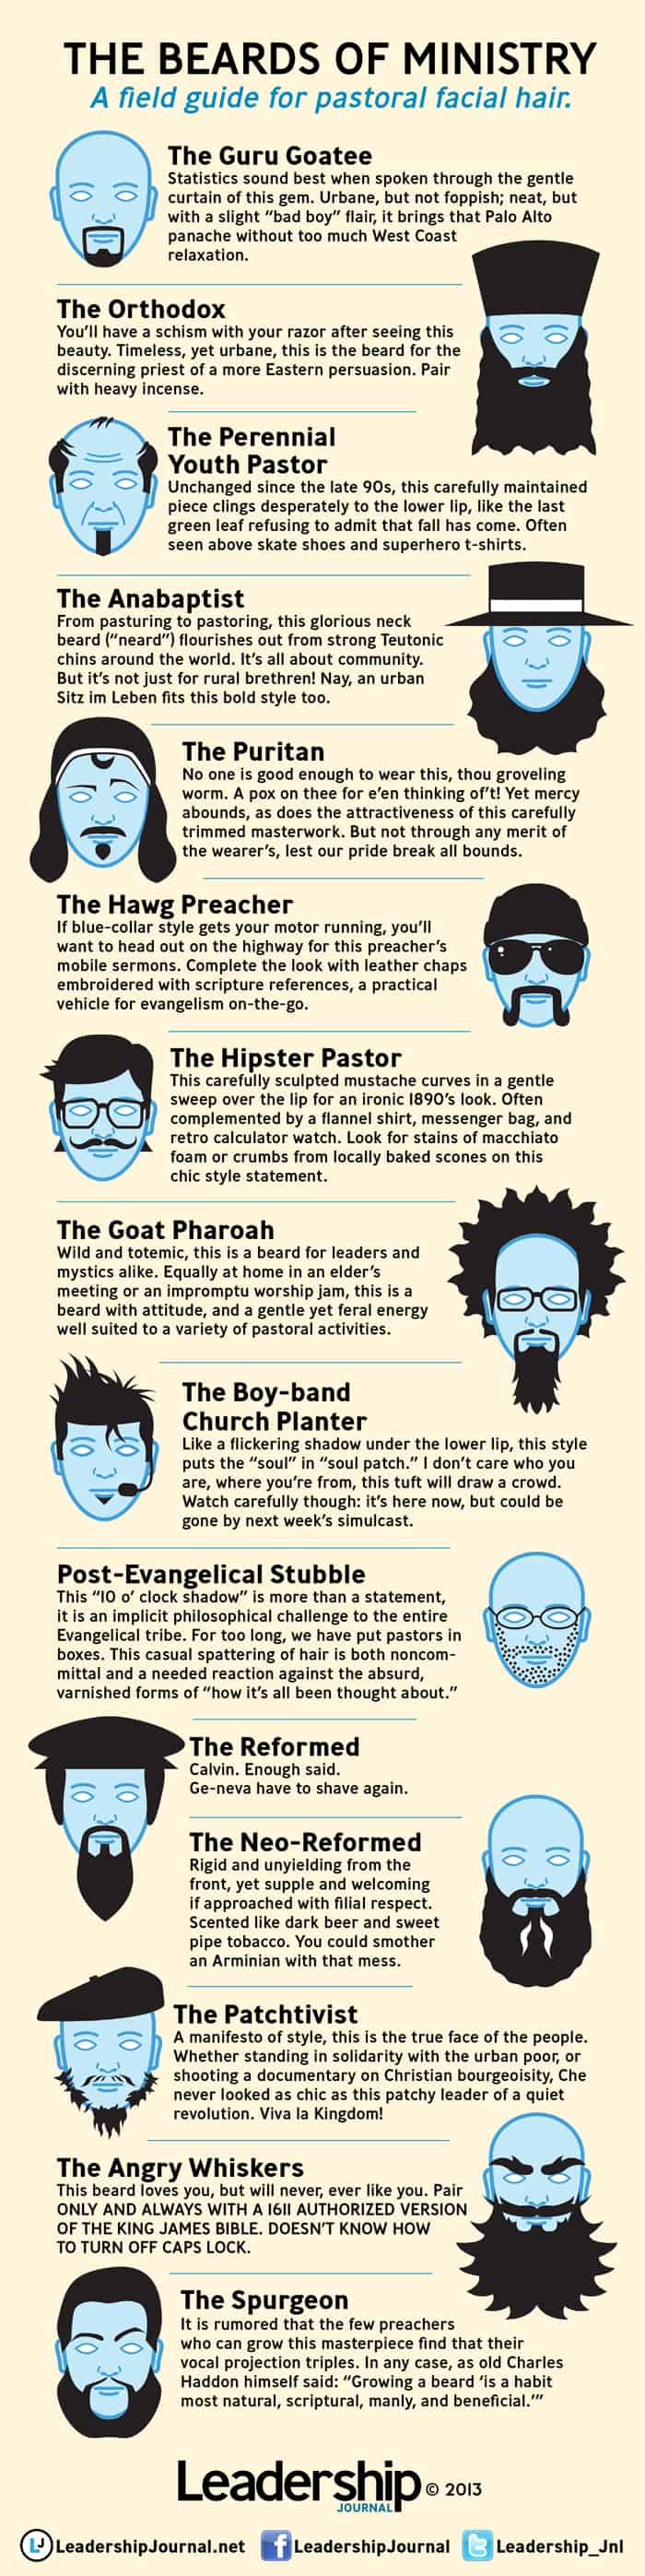 The Beards of Ministry (c) Leadership Journal 2013